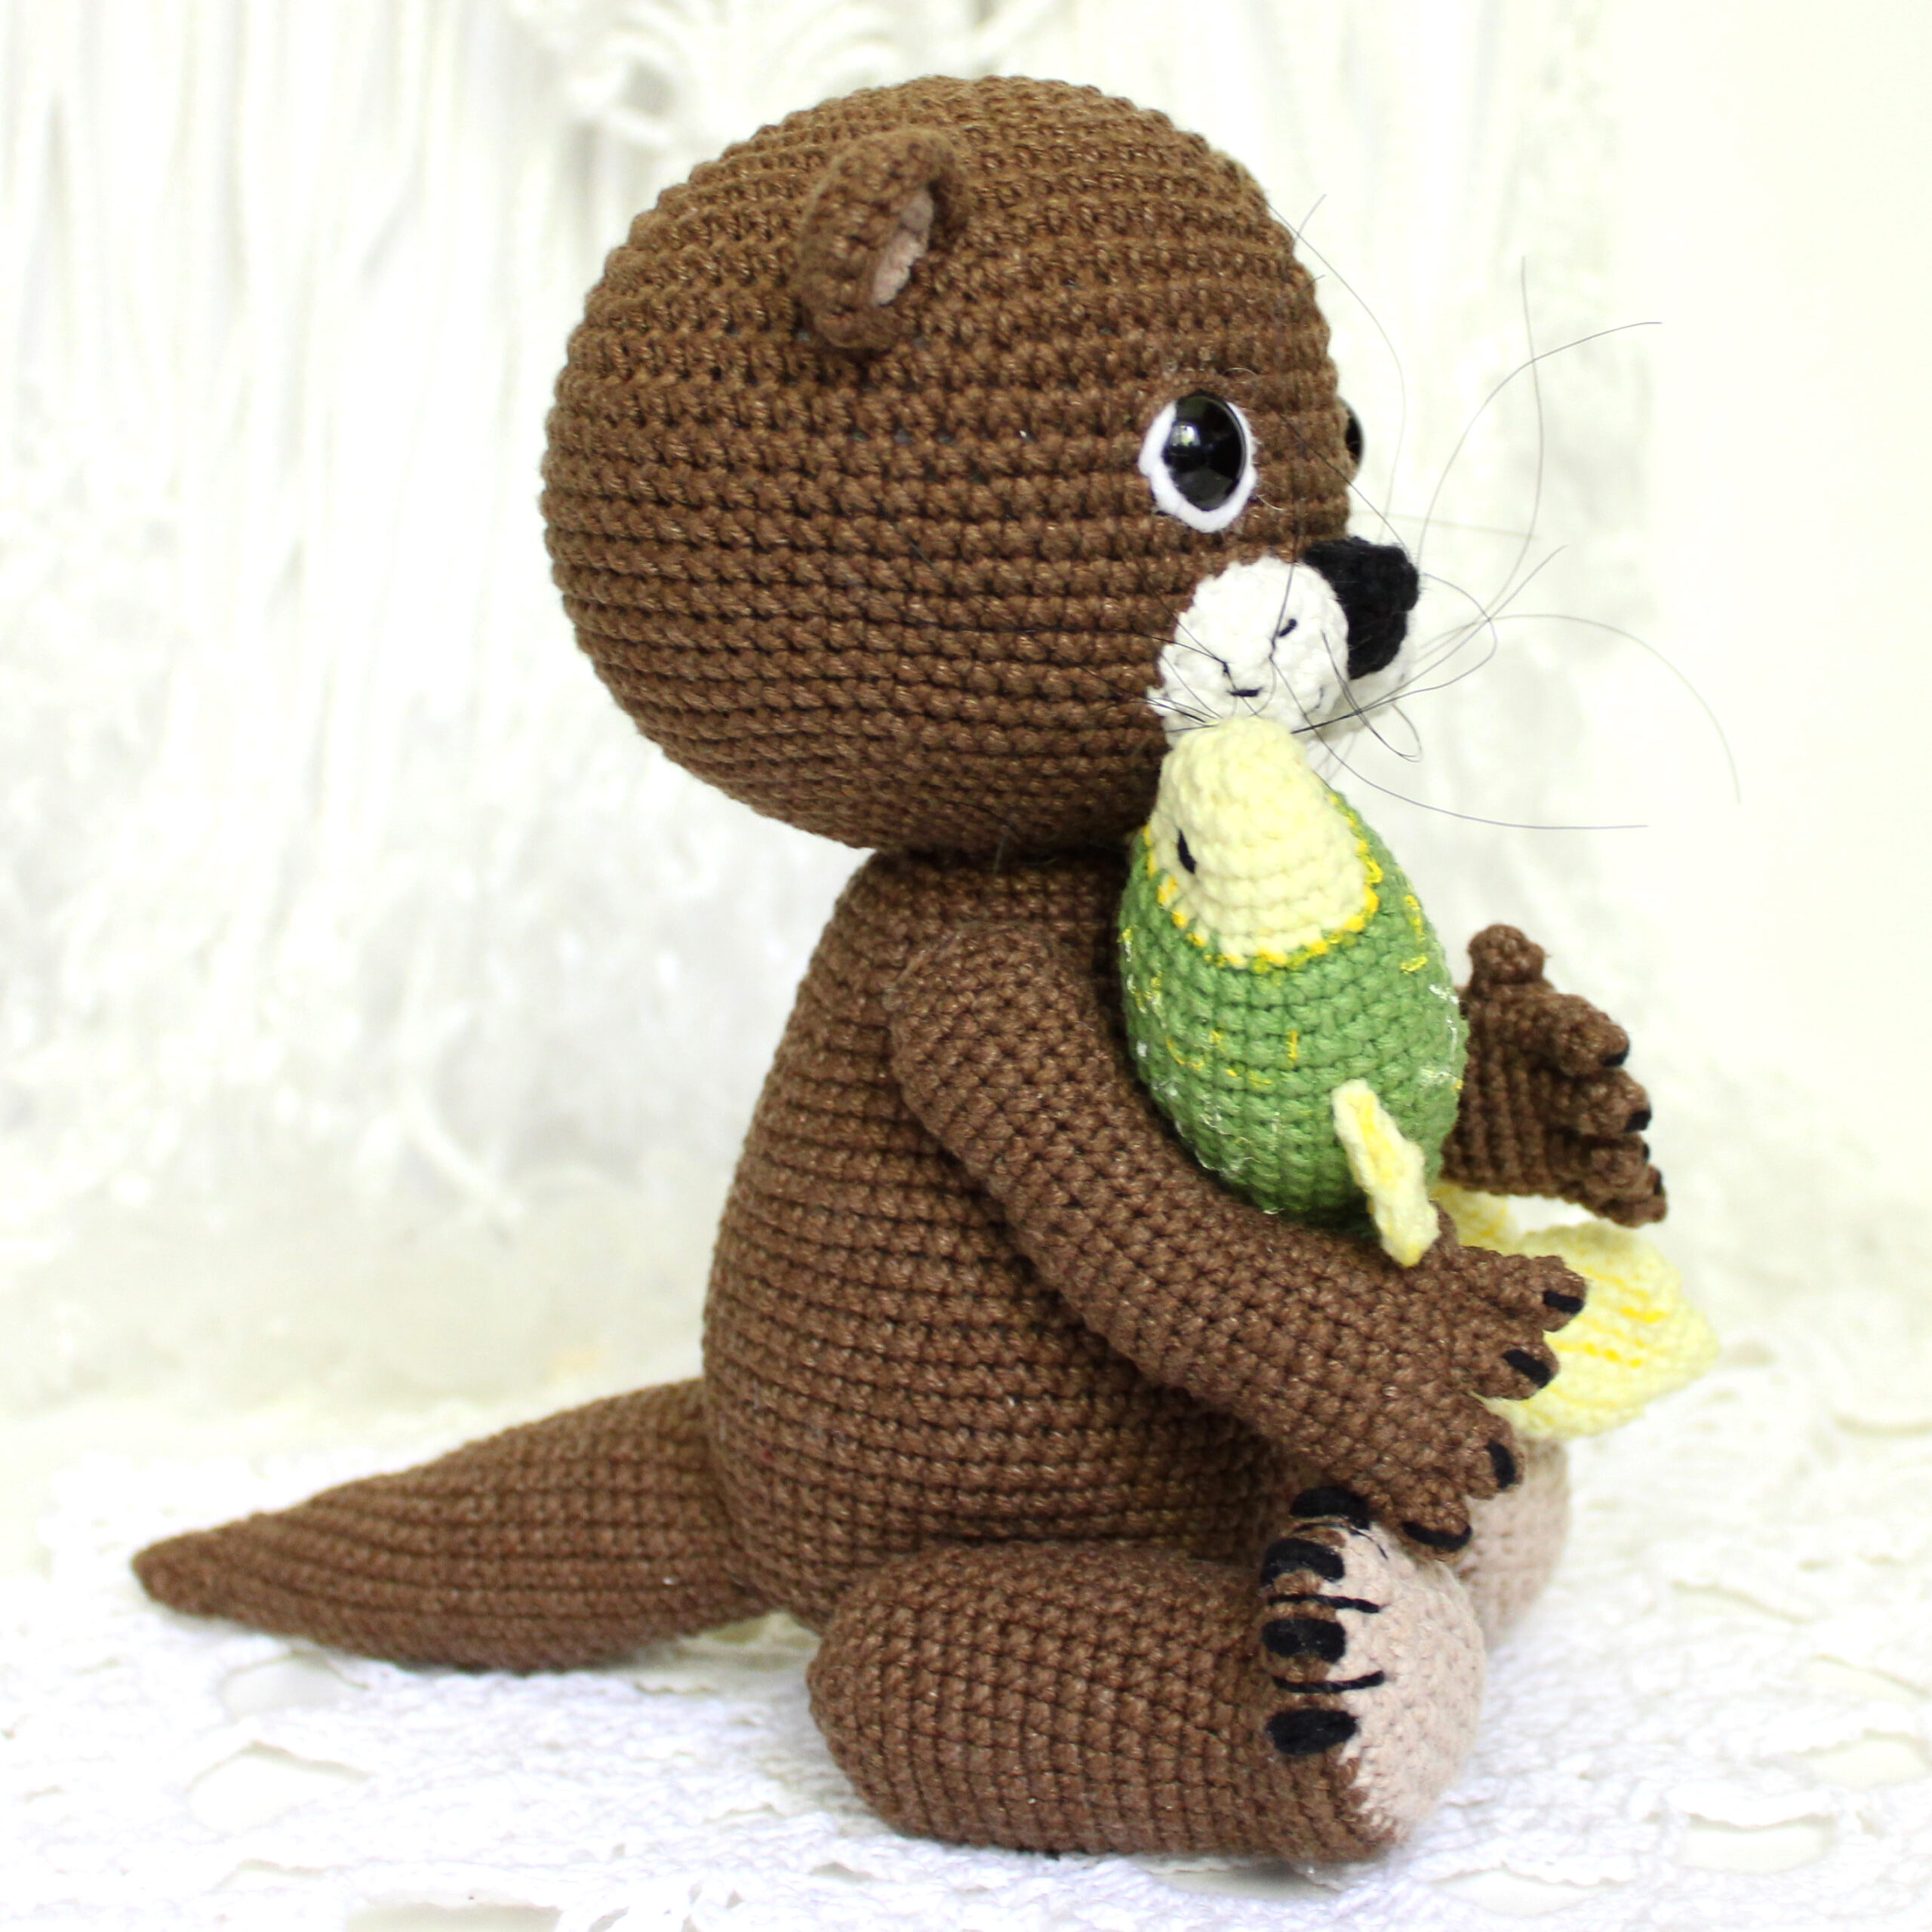 Crafts Corner on Instagram: CROCHET AMIGURUMI KIT  LULU OTTER😍🧶 Kit  contains: - 100% cotton yarn - Crochet hook - Toy stuffing - Pattern  booklet with step by step instructions - Embroidery